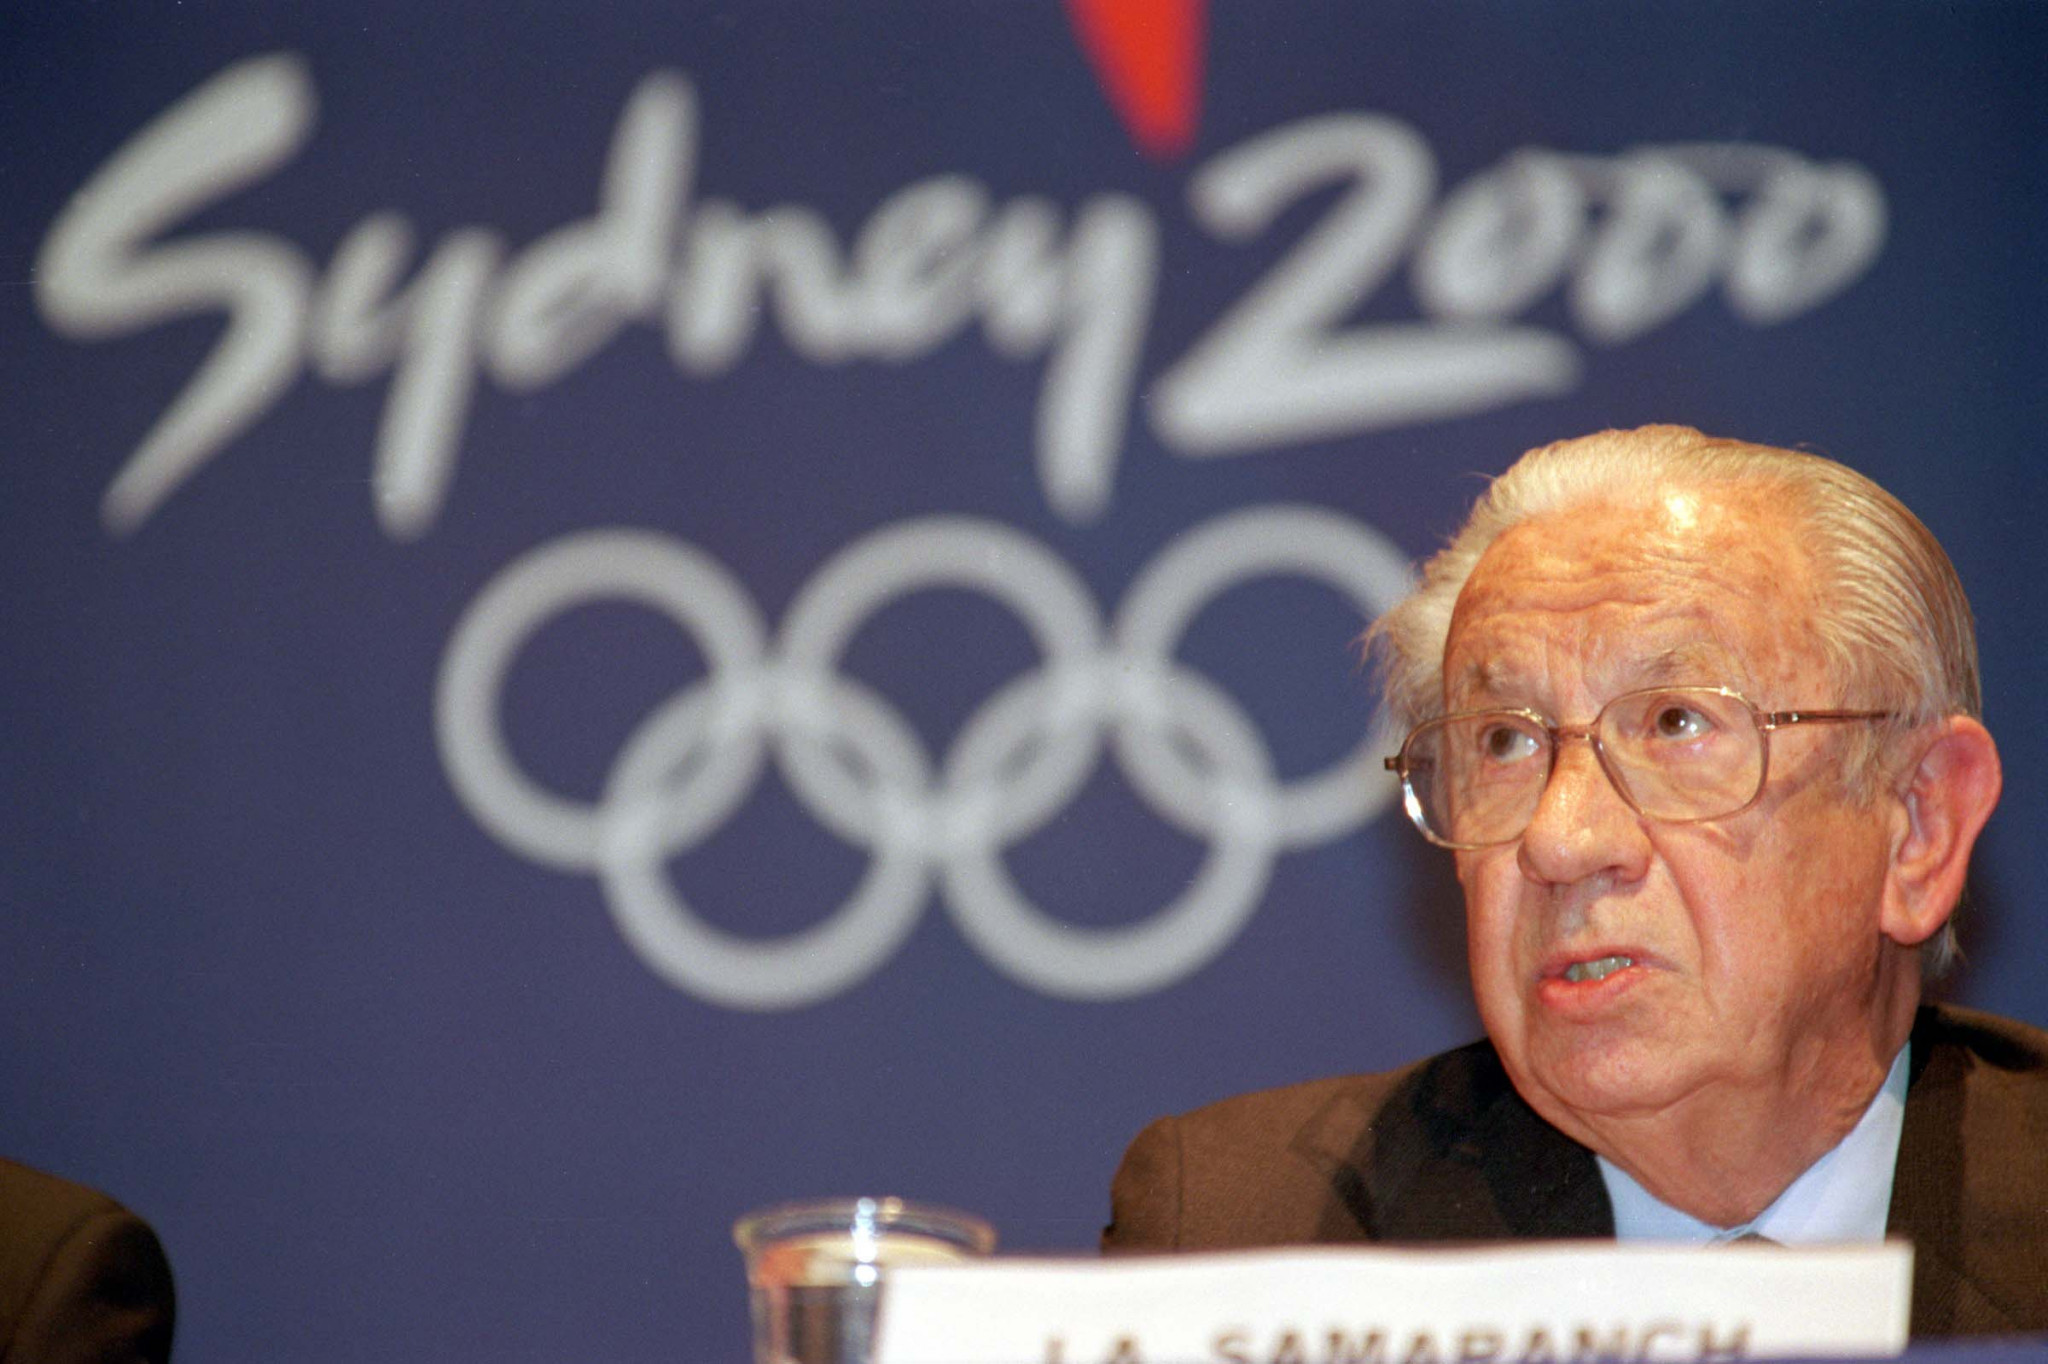 Juan Antonio Samaranch, IOC President during Sydney 2000, spoke at the time of his "delight" that athletes from East Tibor were able to experience Olympic competition ©Getty Images